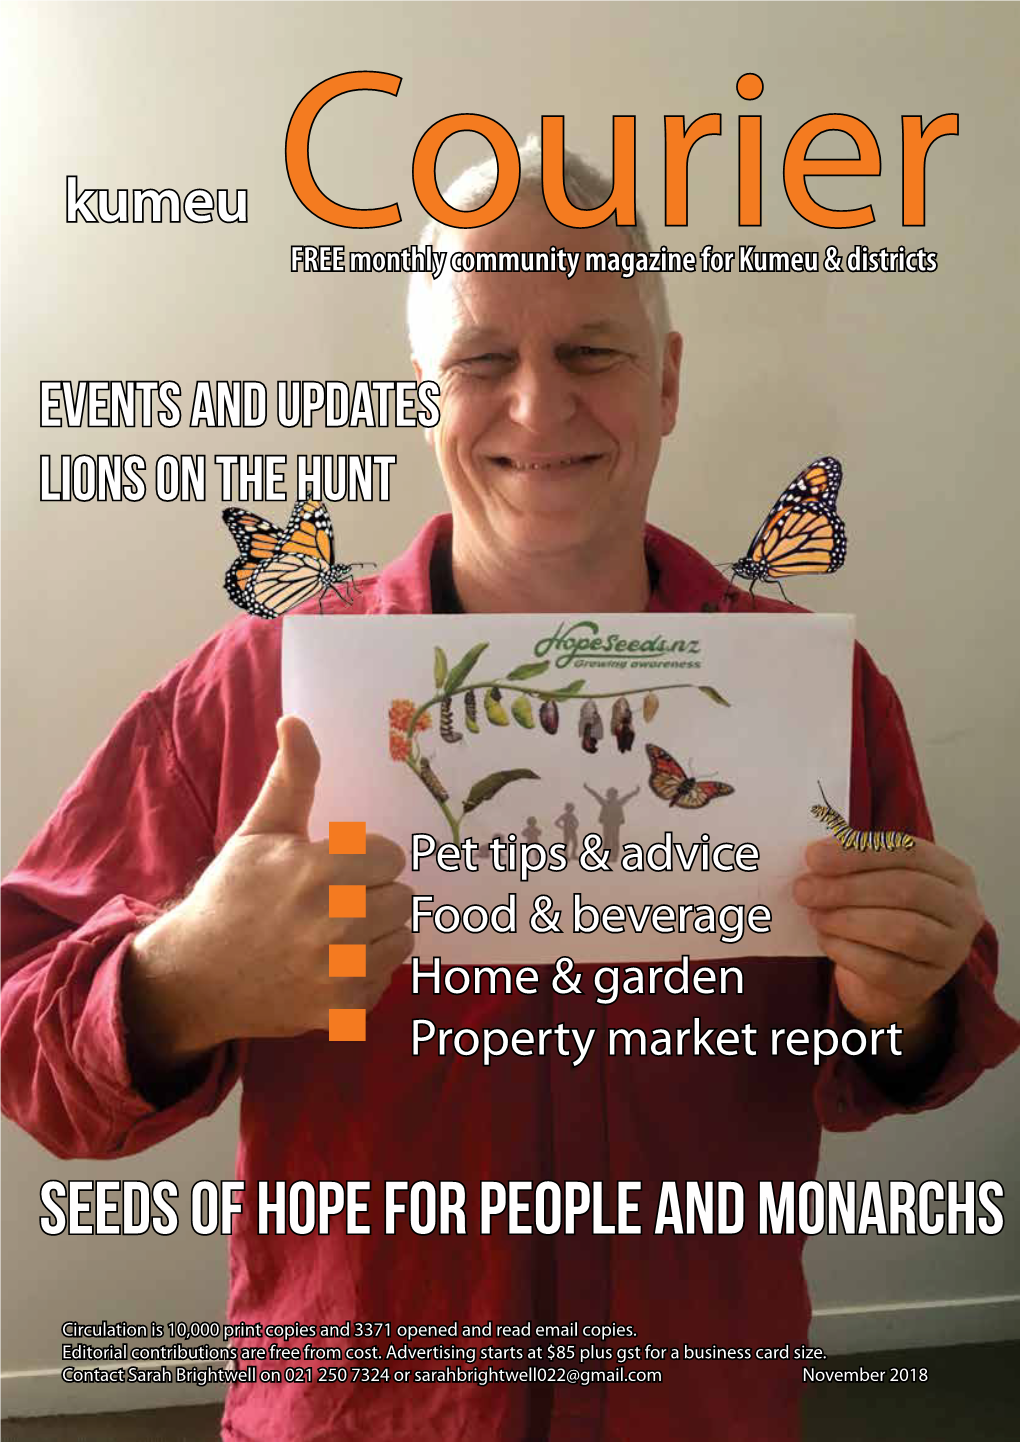 Seeds of Hope for People and Monarchs